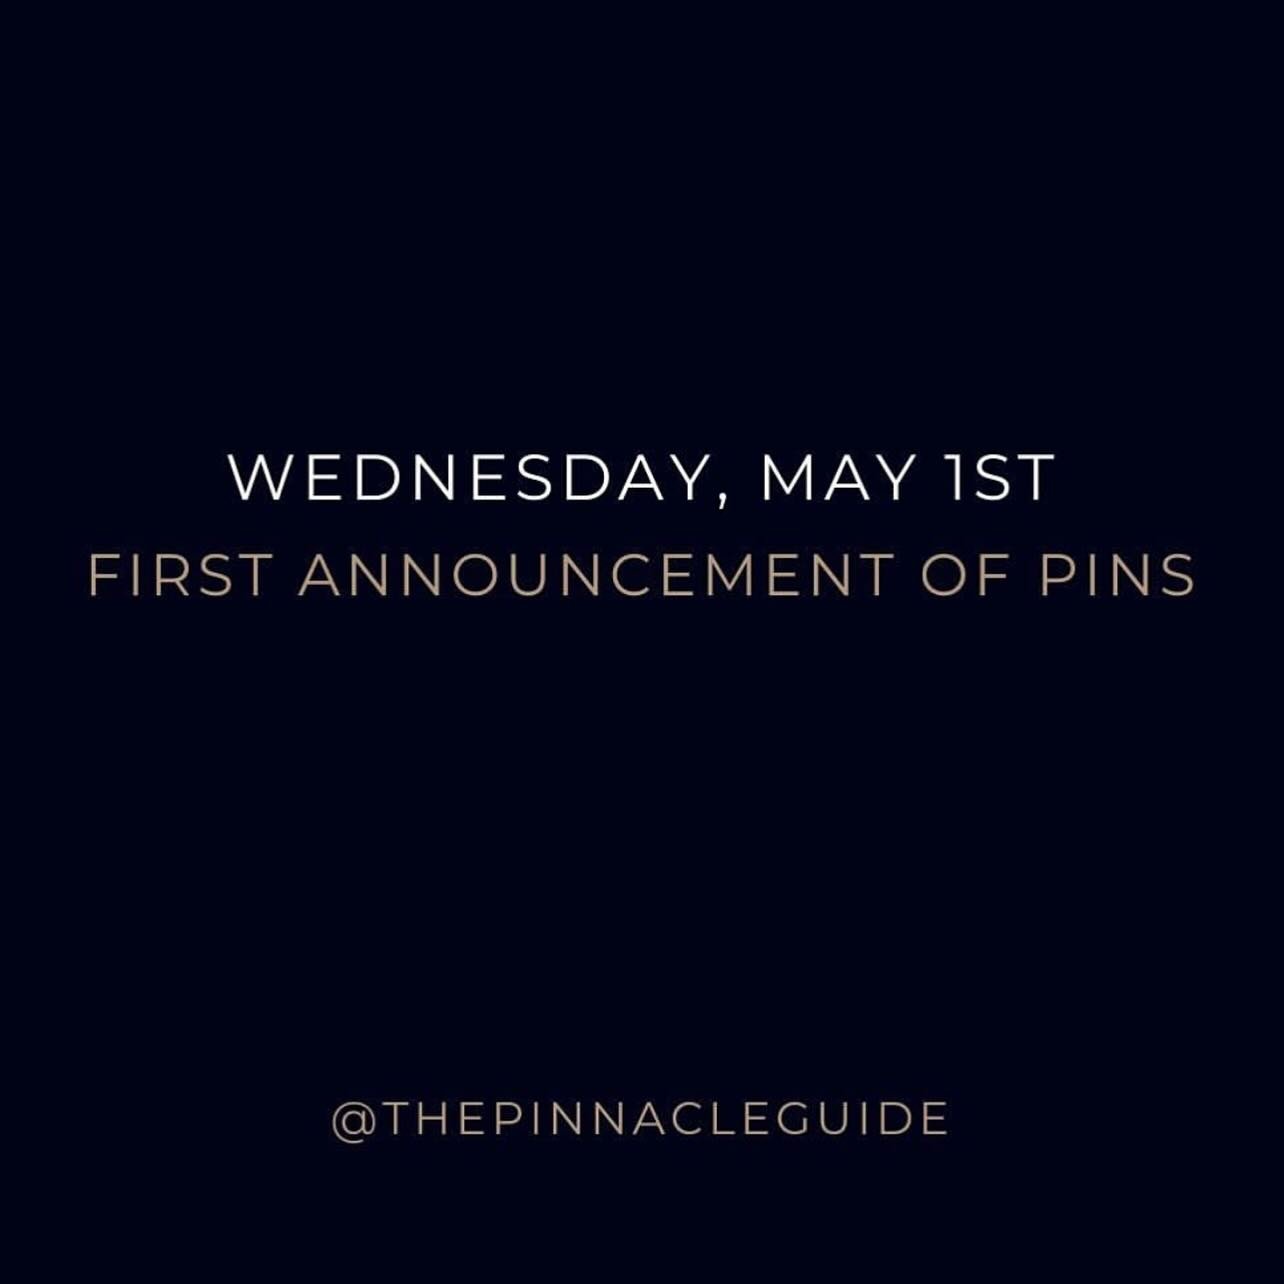 On Wednesday, May 1st, The Pinnacle Guide will announce the first round of PINs, featuring bars recognised across all of our seven launch countries - Australia, Dubai, Mexico, Singapore, Spain, the United Kingdom, and the United States.

This momento